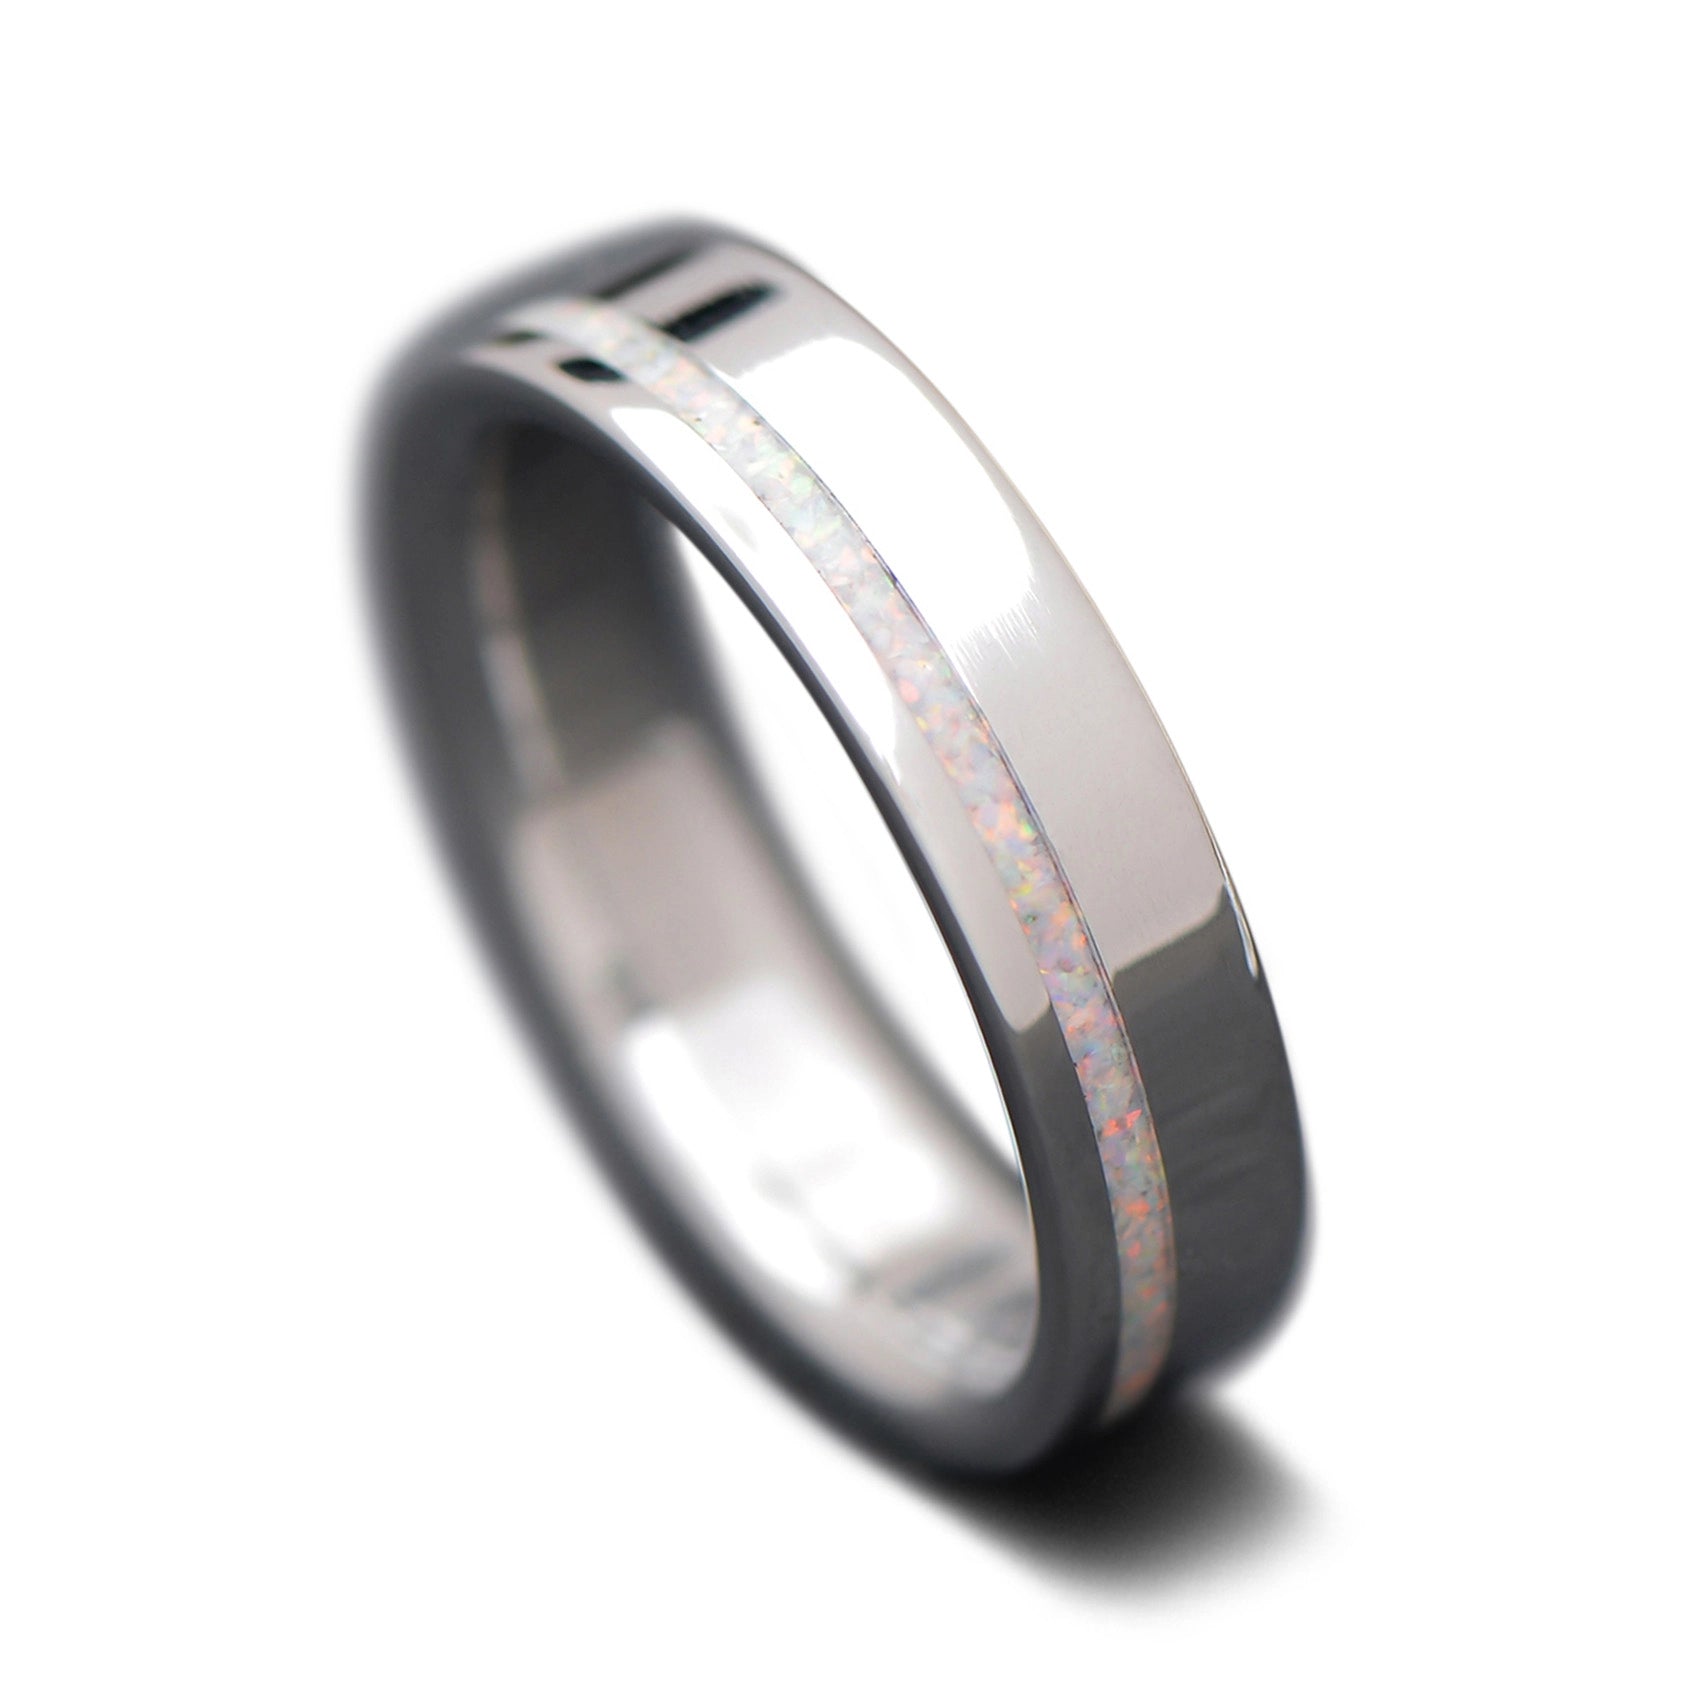 Titanium Core Ring with Pearl Opal inlay, 5mm -THE SHIFT